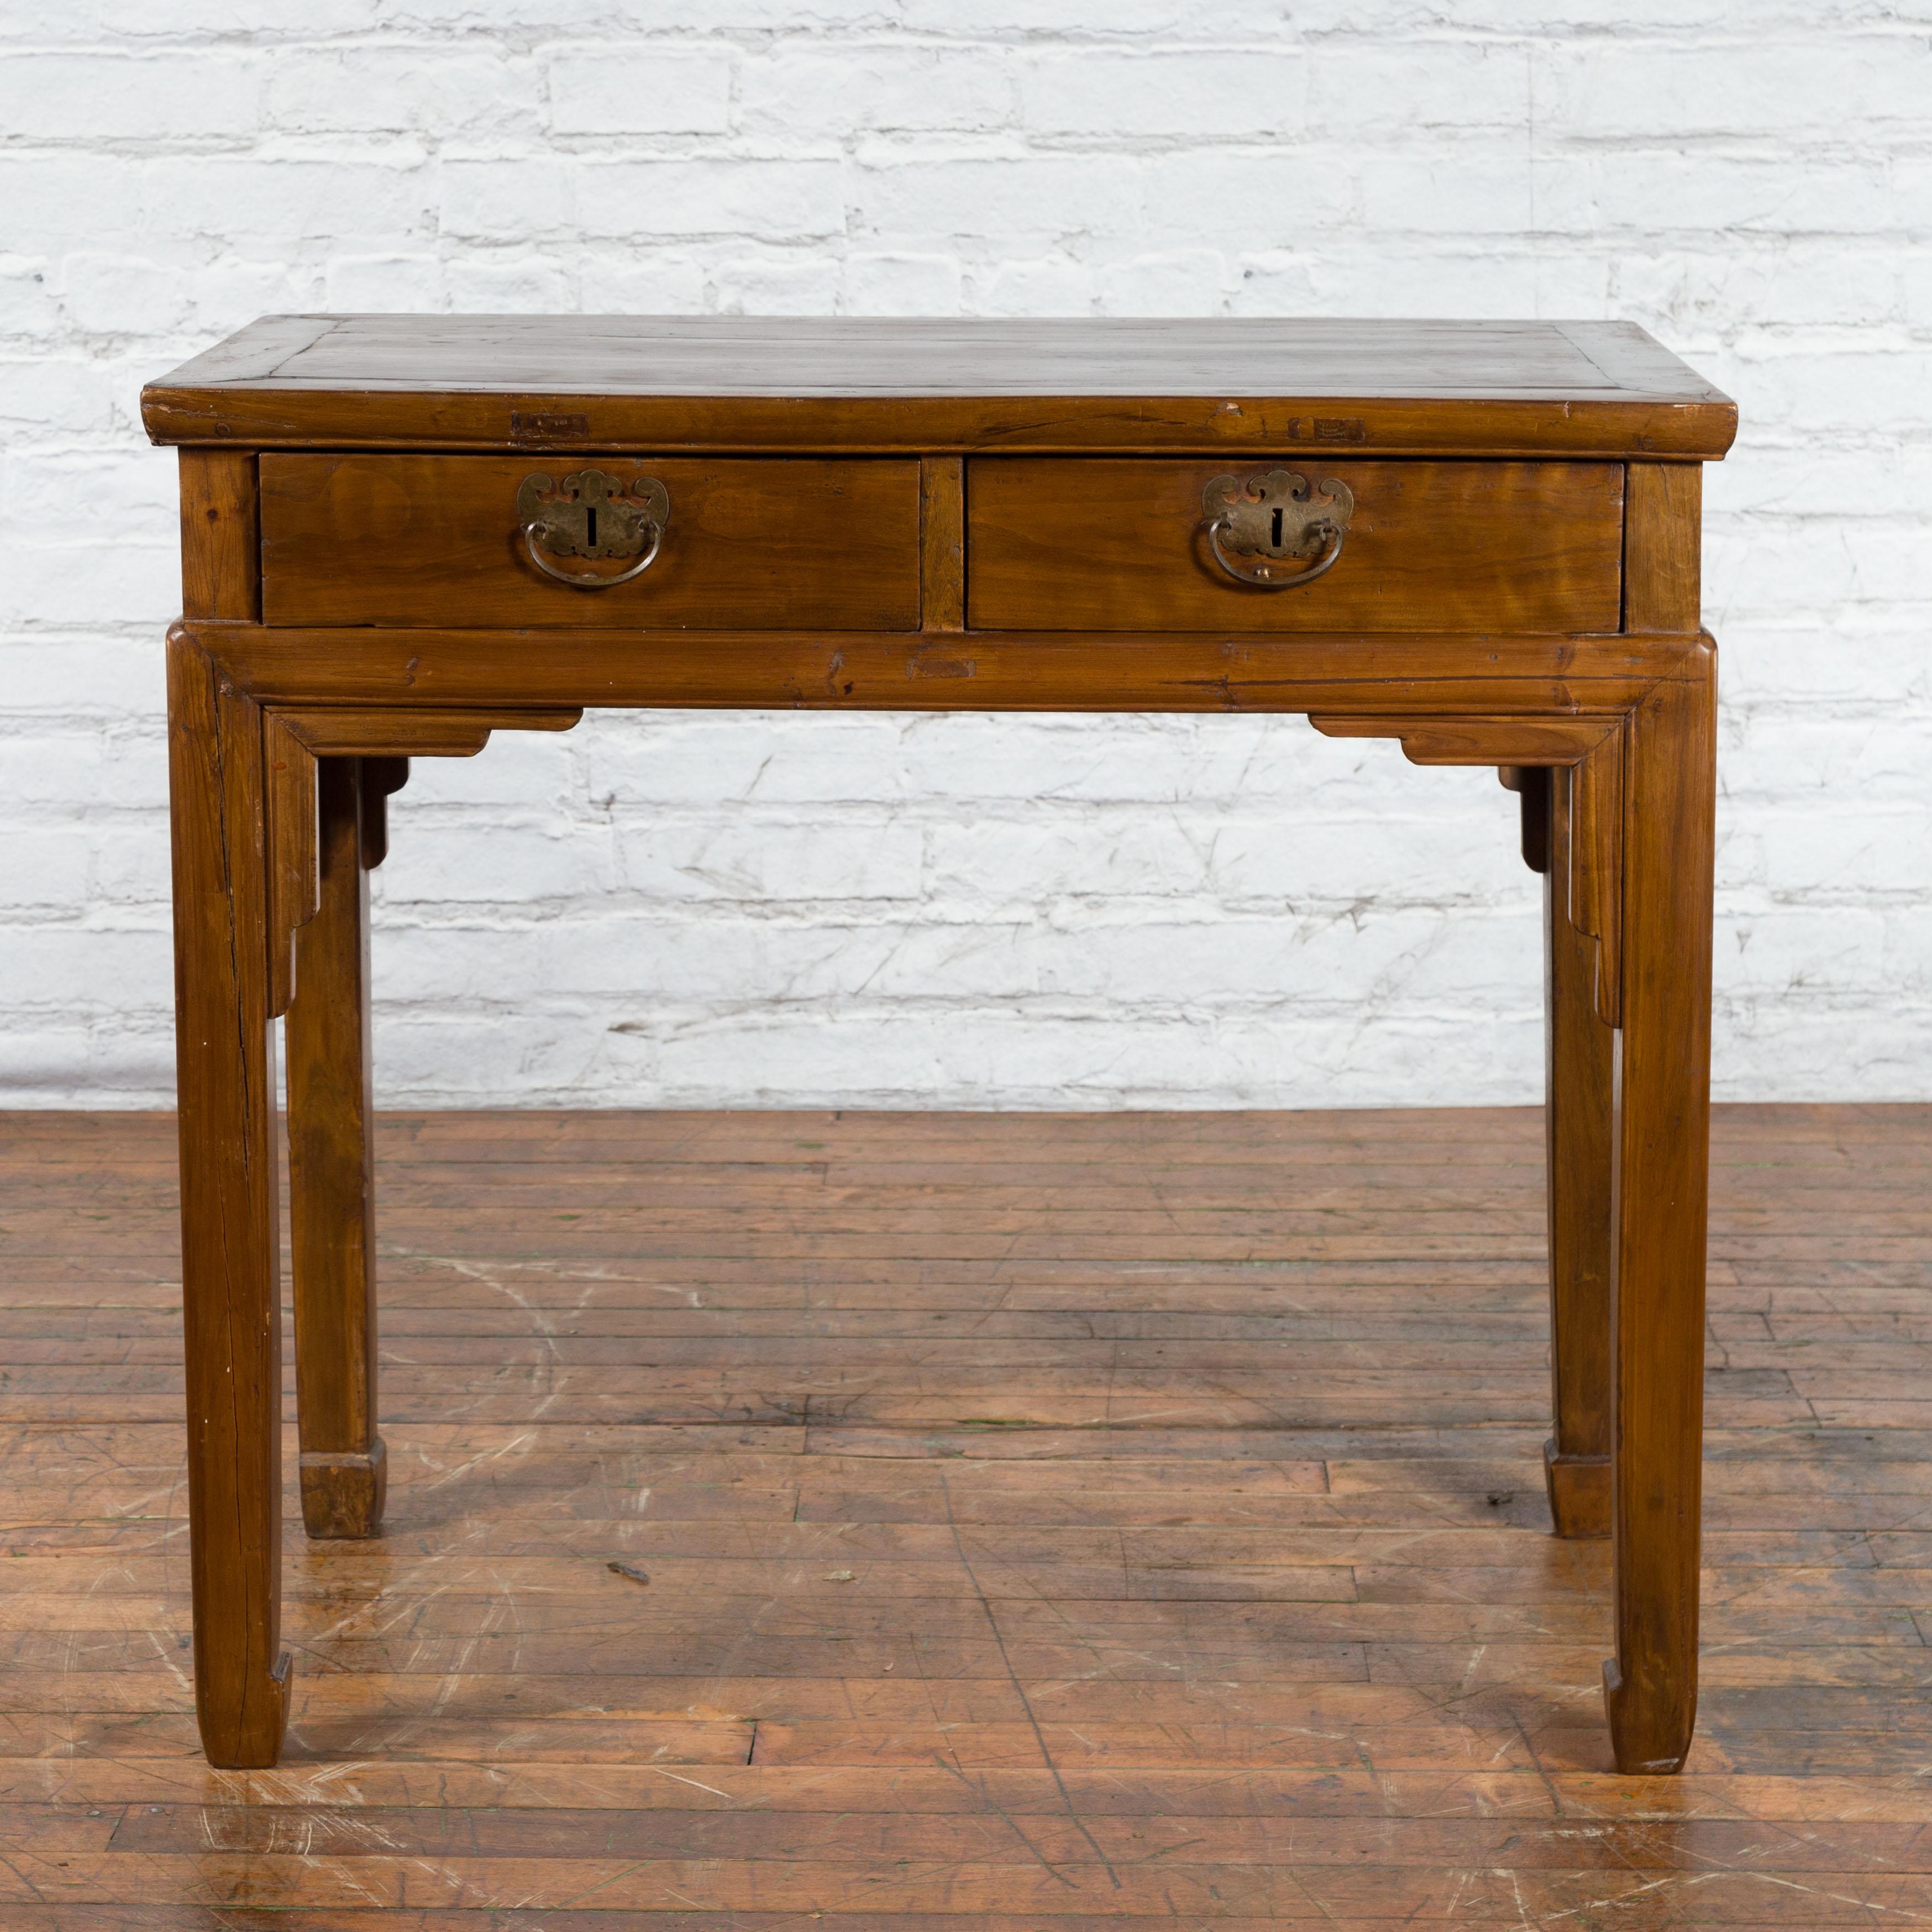 A Chinese Qing Dynasty period wooden desk from the 19th century with two drawers, horse hoof legs, carved spandrels and butterfly bronze hardware. Created in China during the Qing Dynasty period in the 19th century, this wooden desk features a